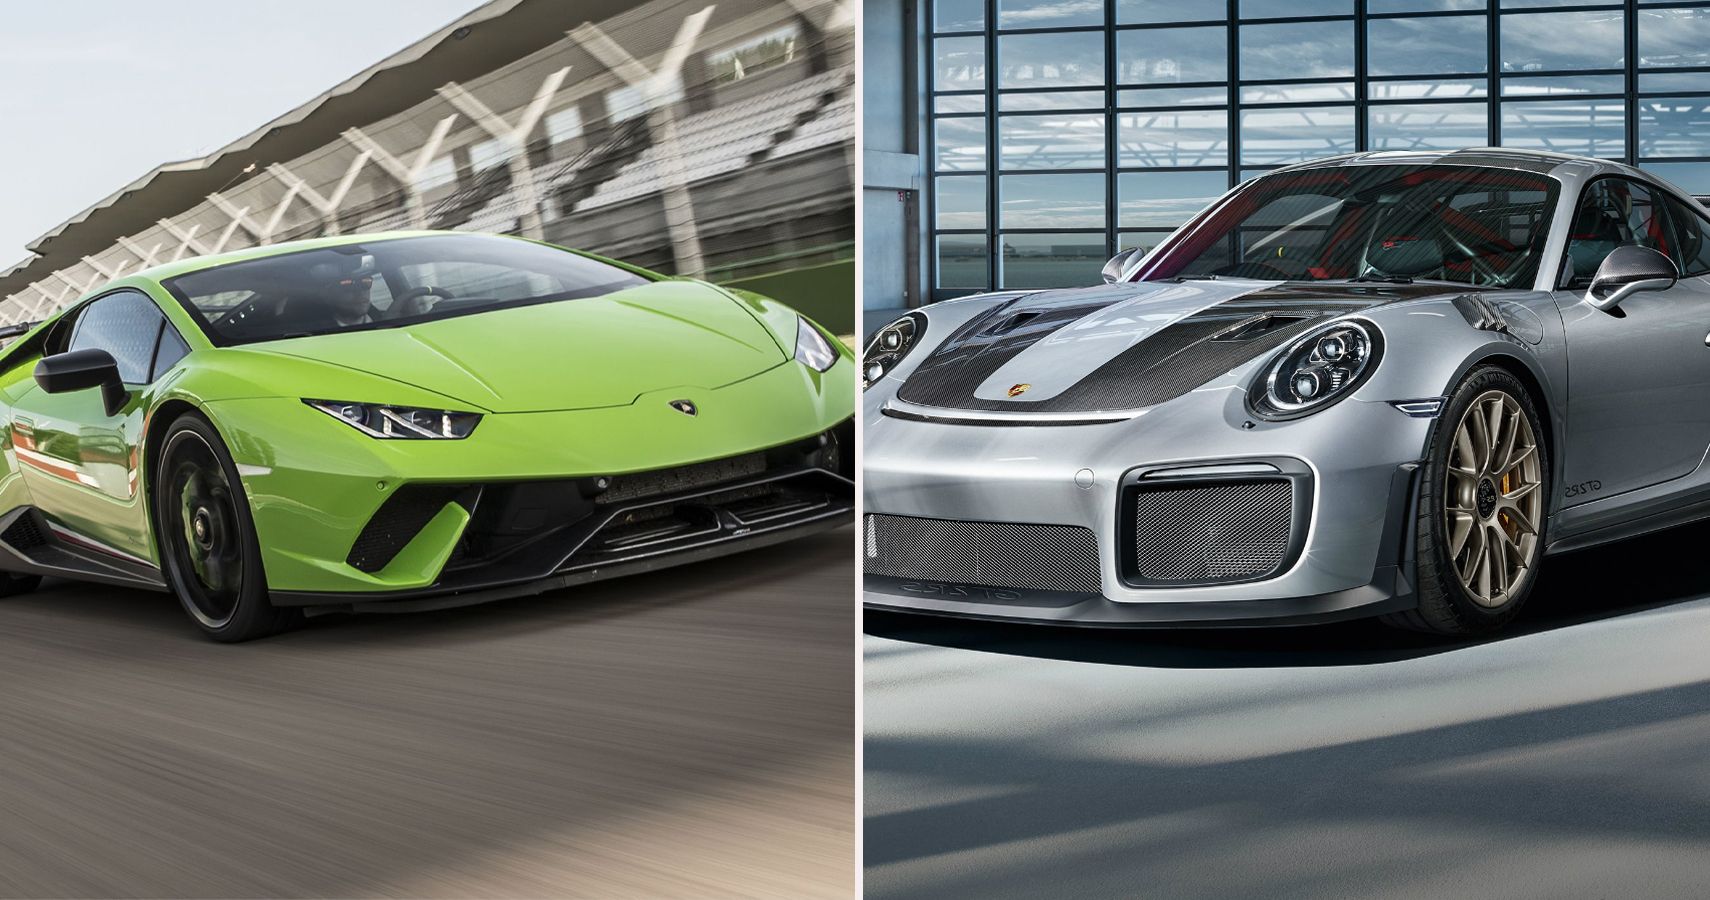 The 10 Best Supercars Available In 2019 | HotCars